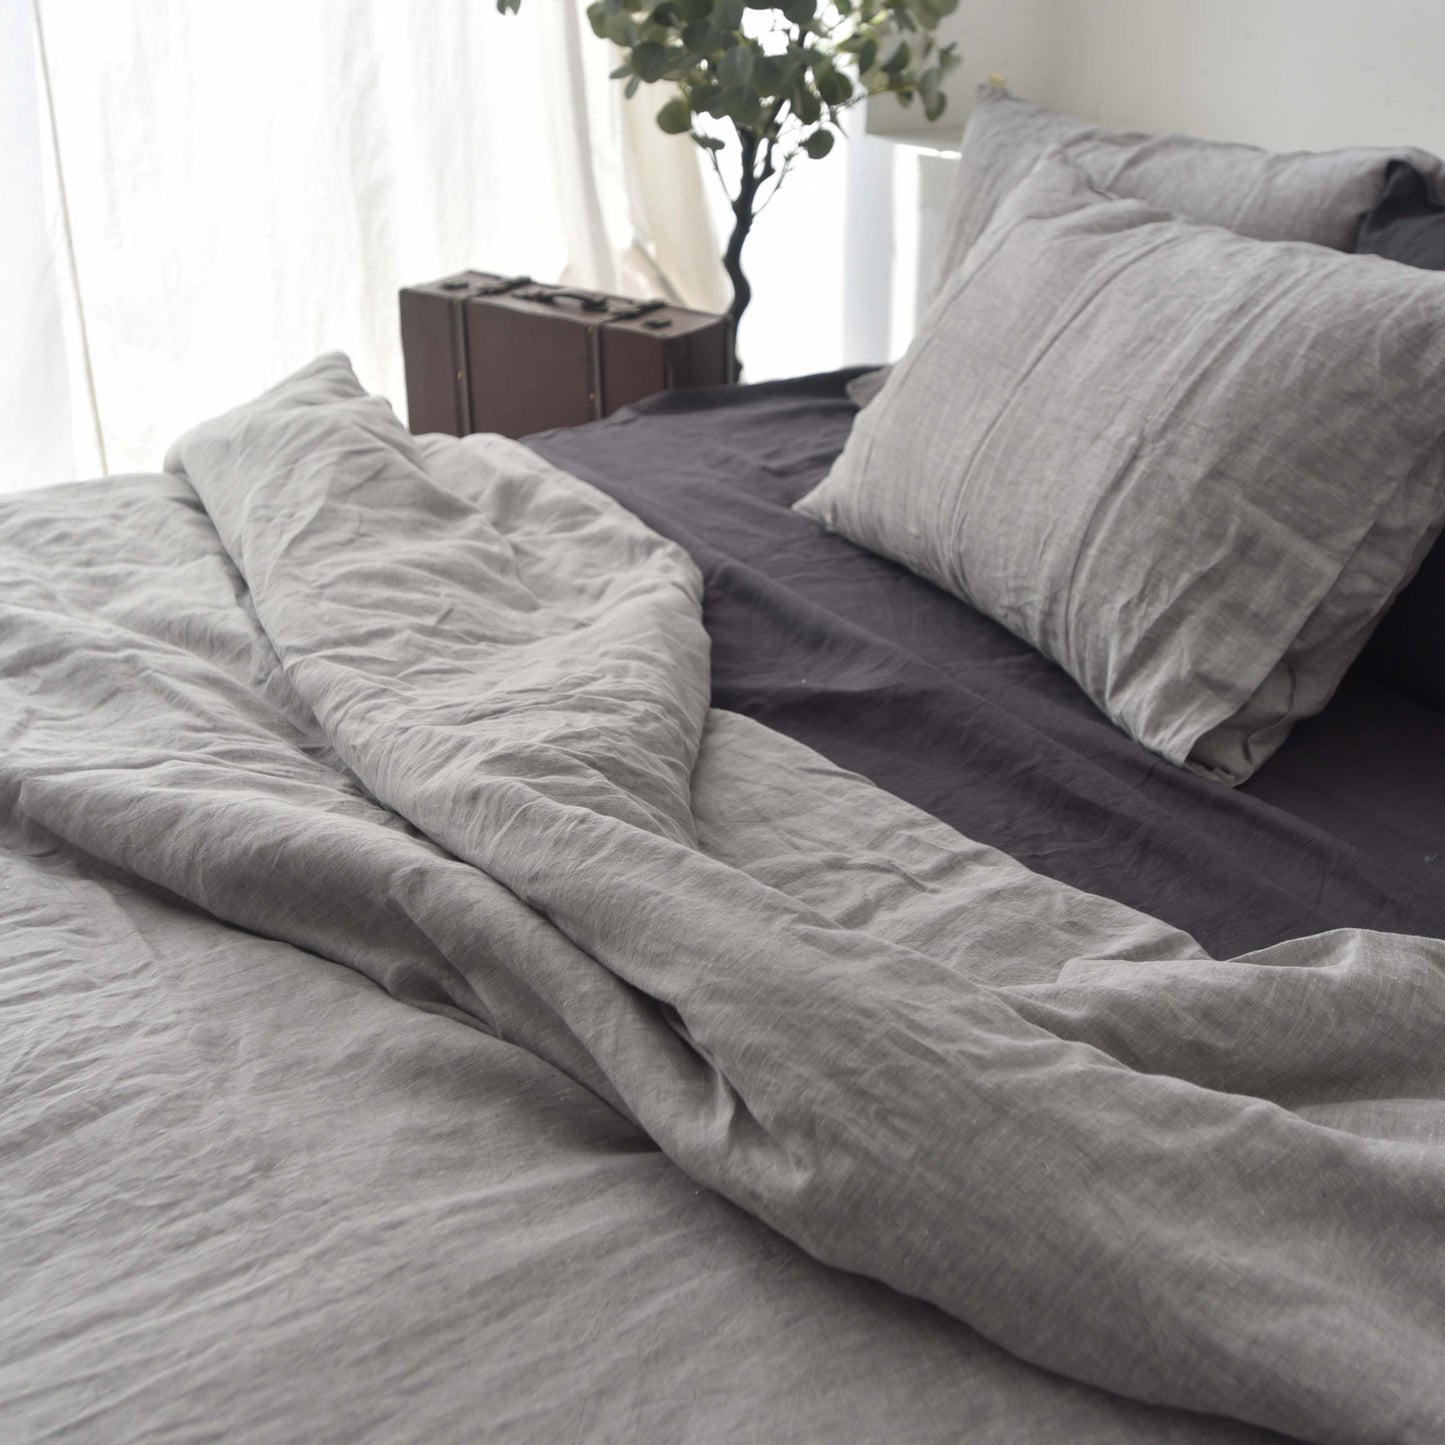 Light Gray French Linen Bedding Sets (4 pieces) - Yarn Dyeing